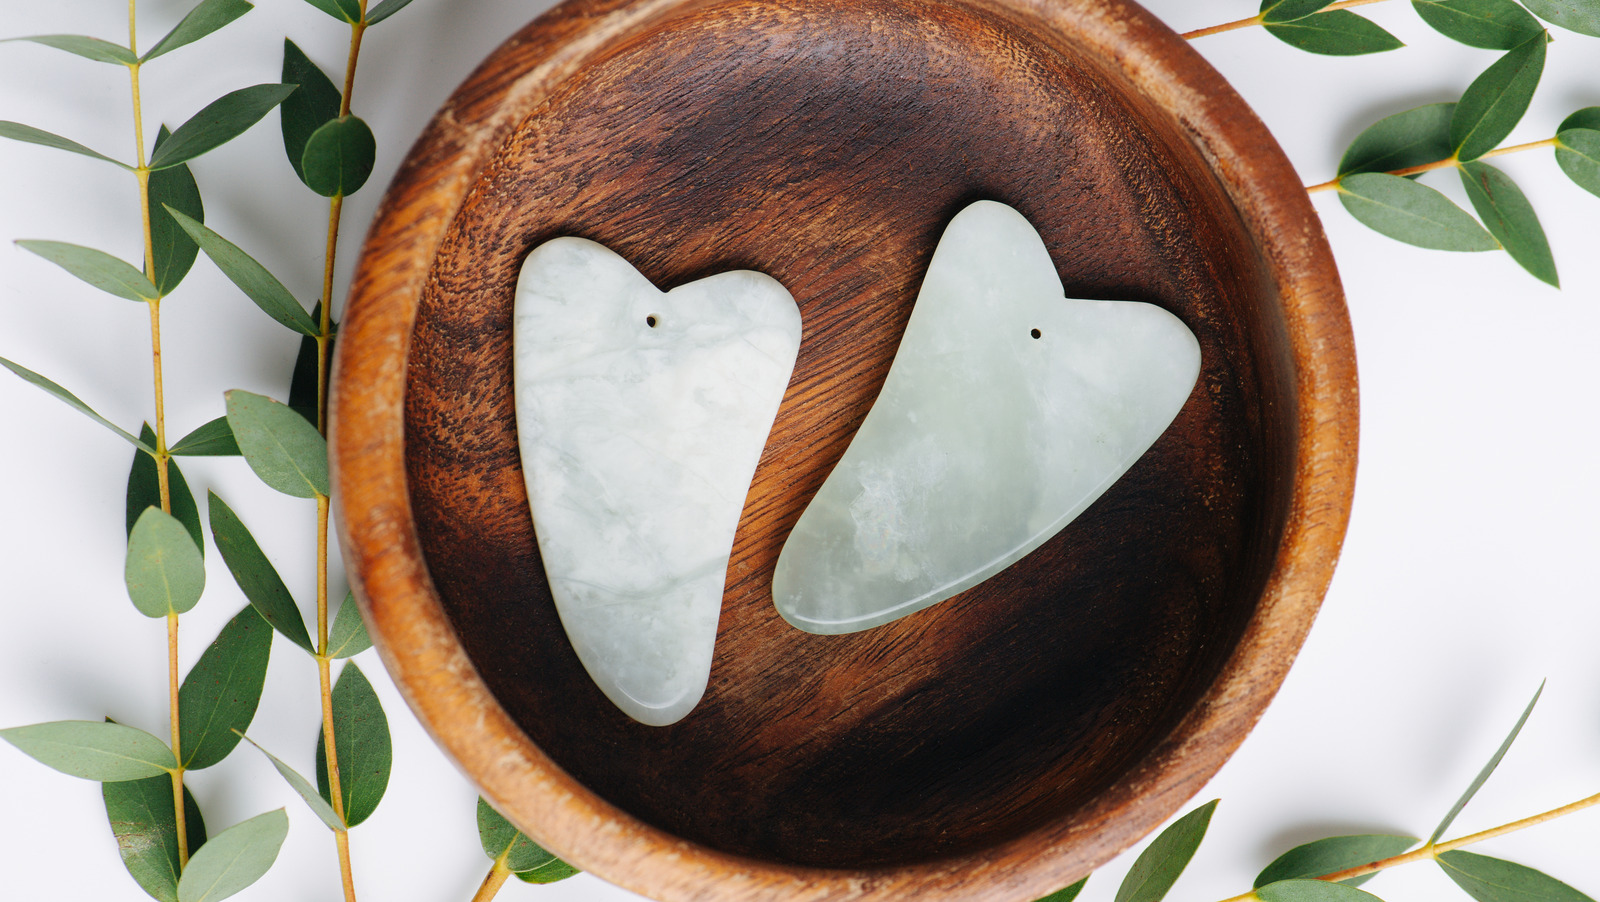 How To Choose The Best Gua Sha Stone For You